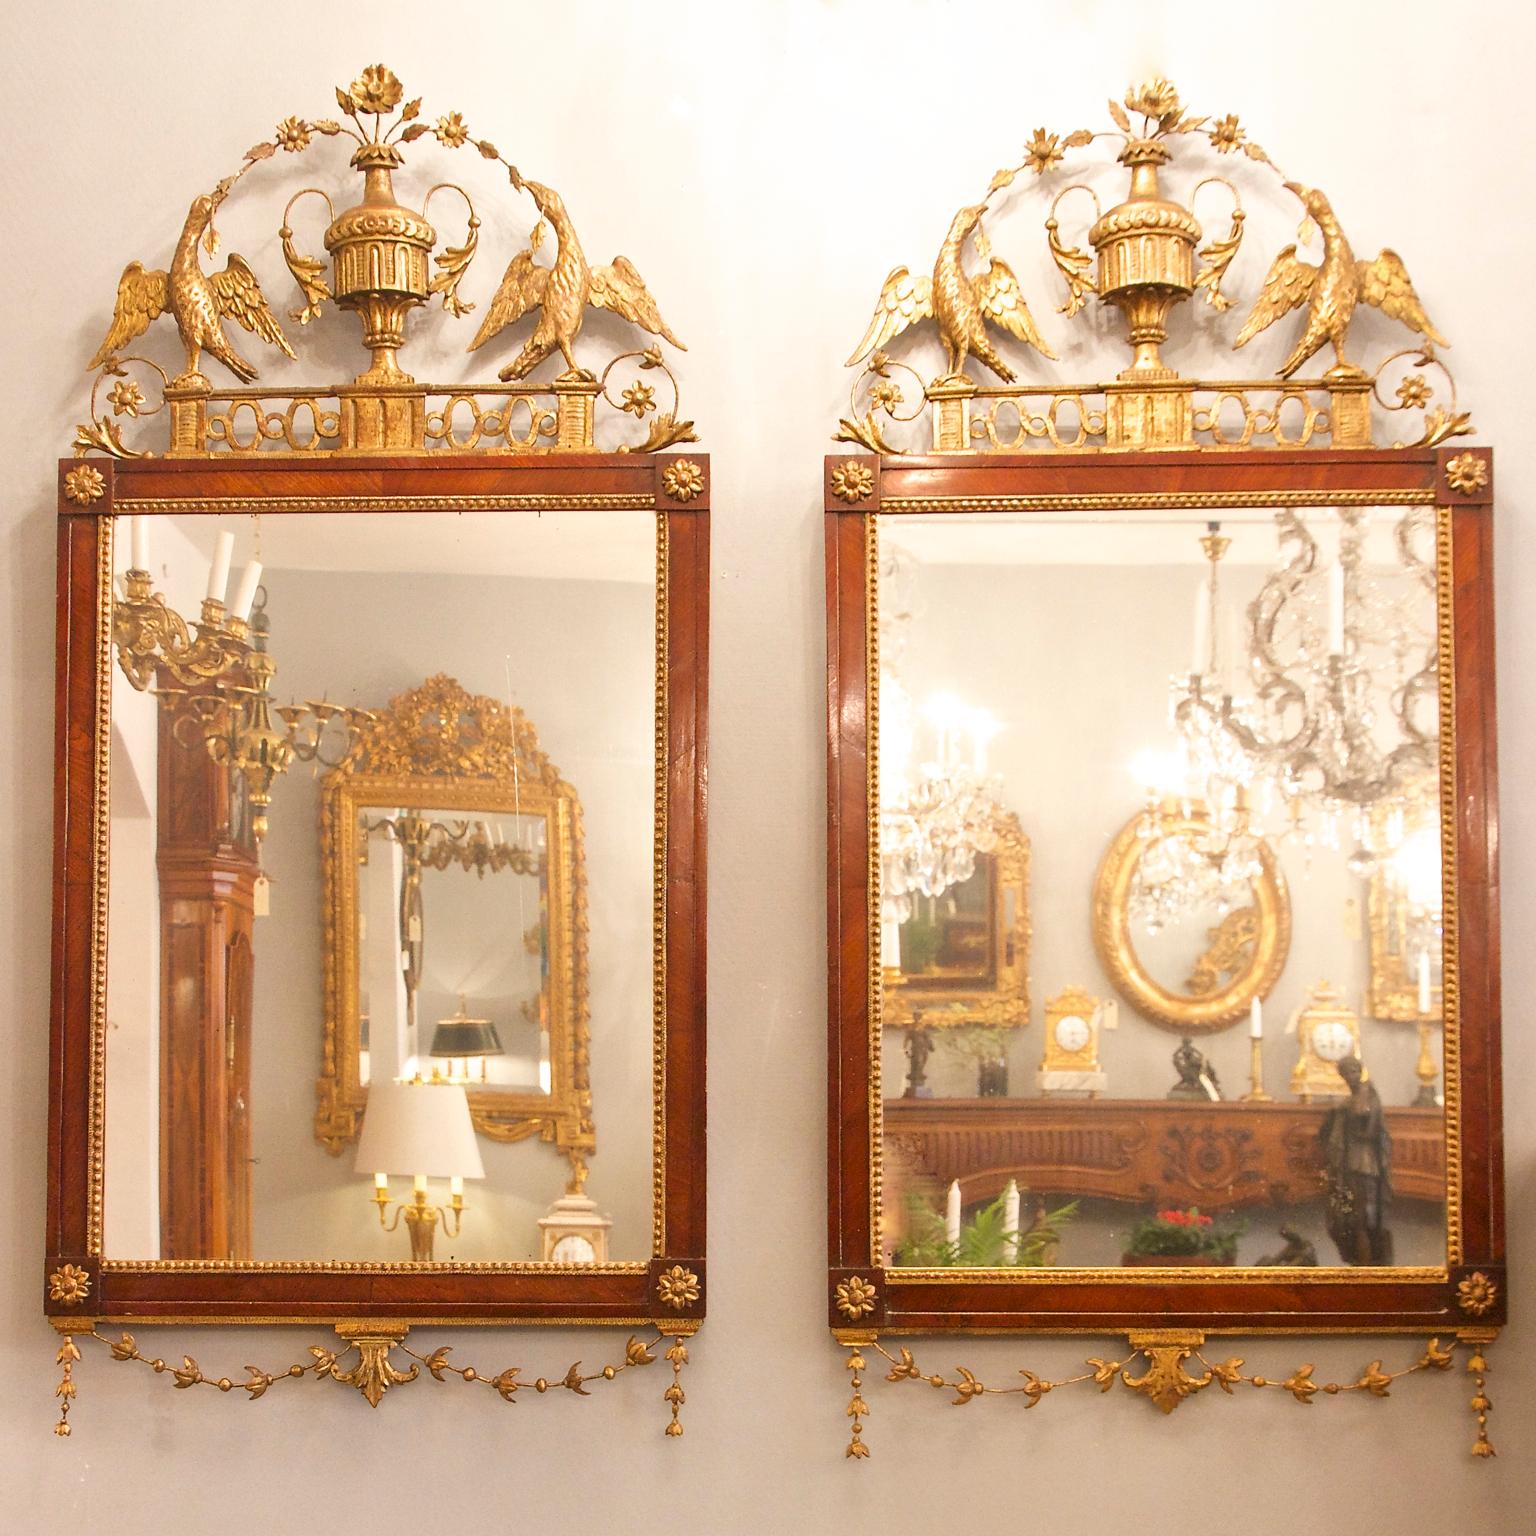 Pair of Late 18th Century Neoclassical Figural Walnut and Giltwood Wall Mirrors 5